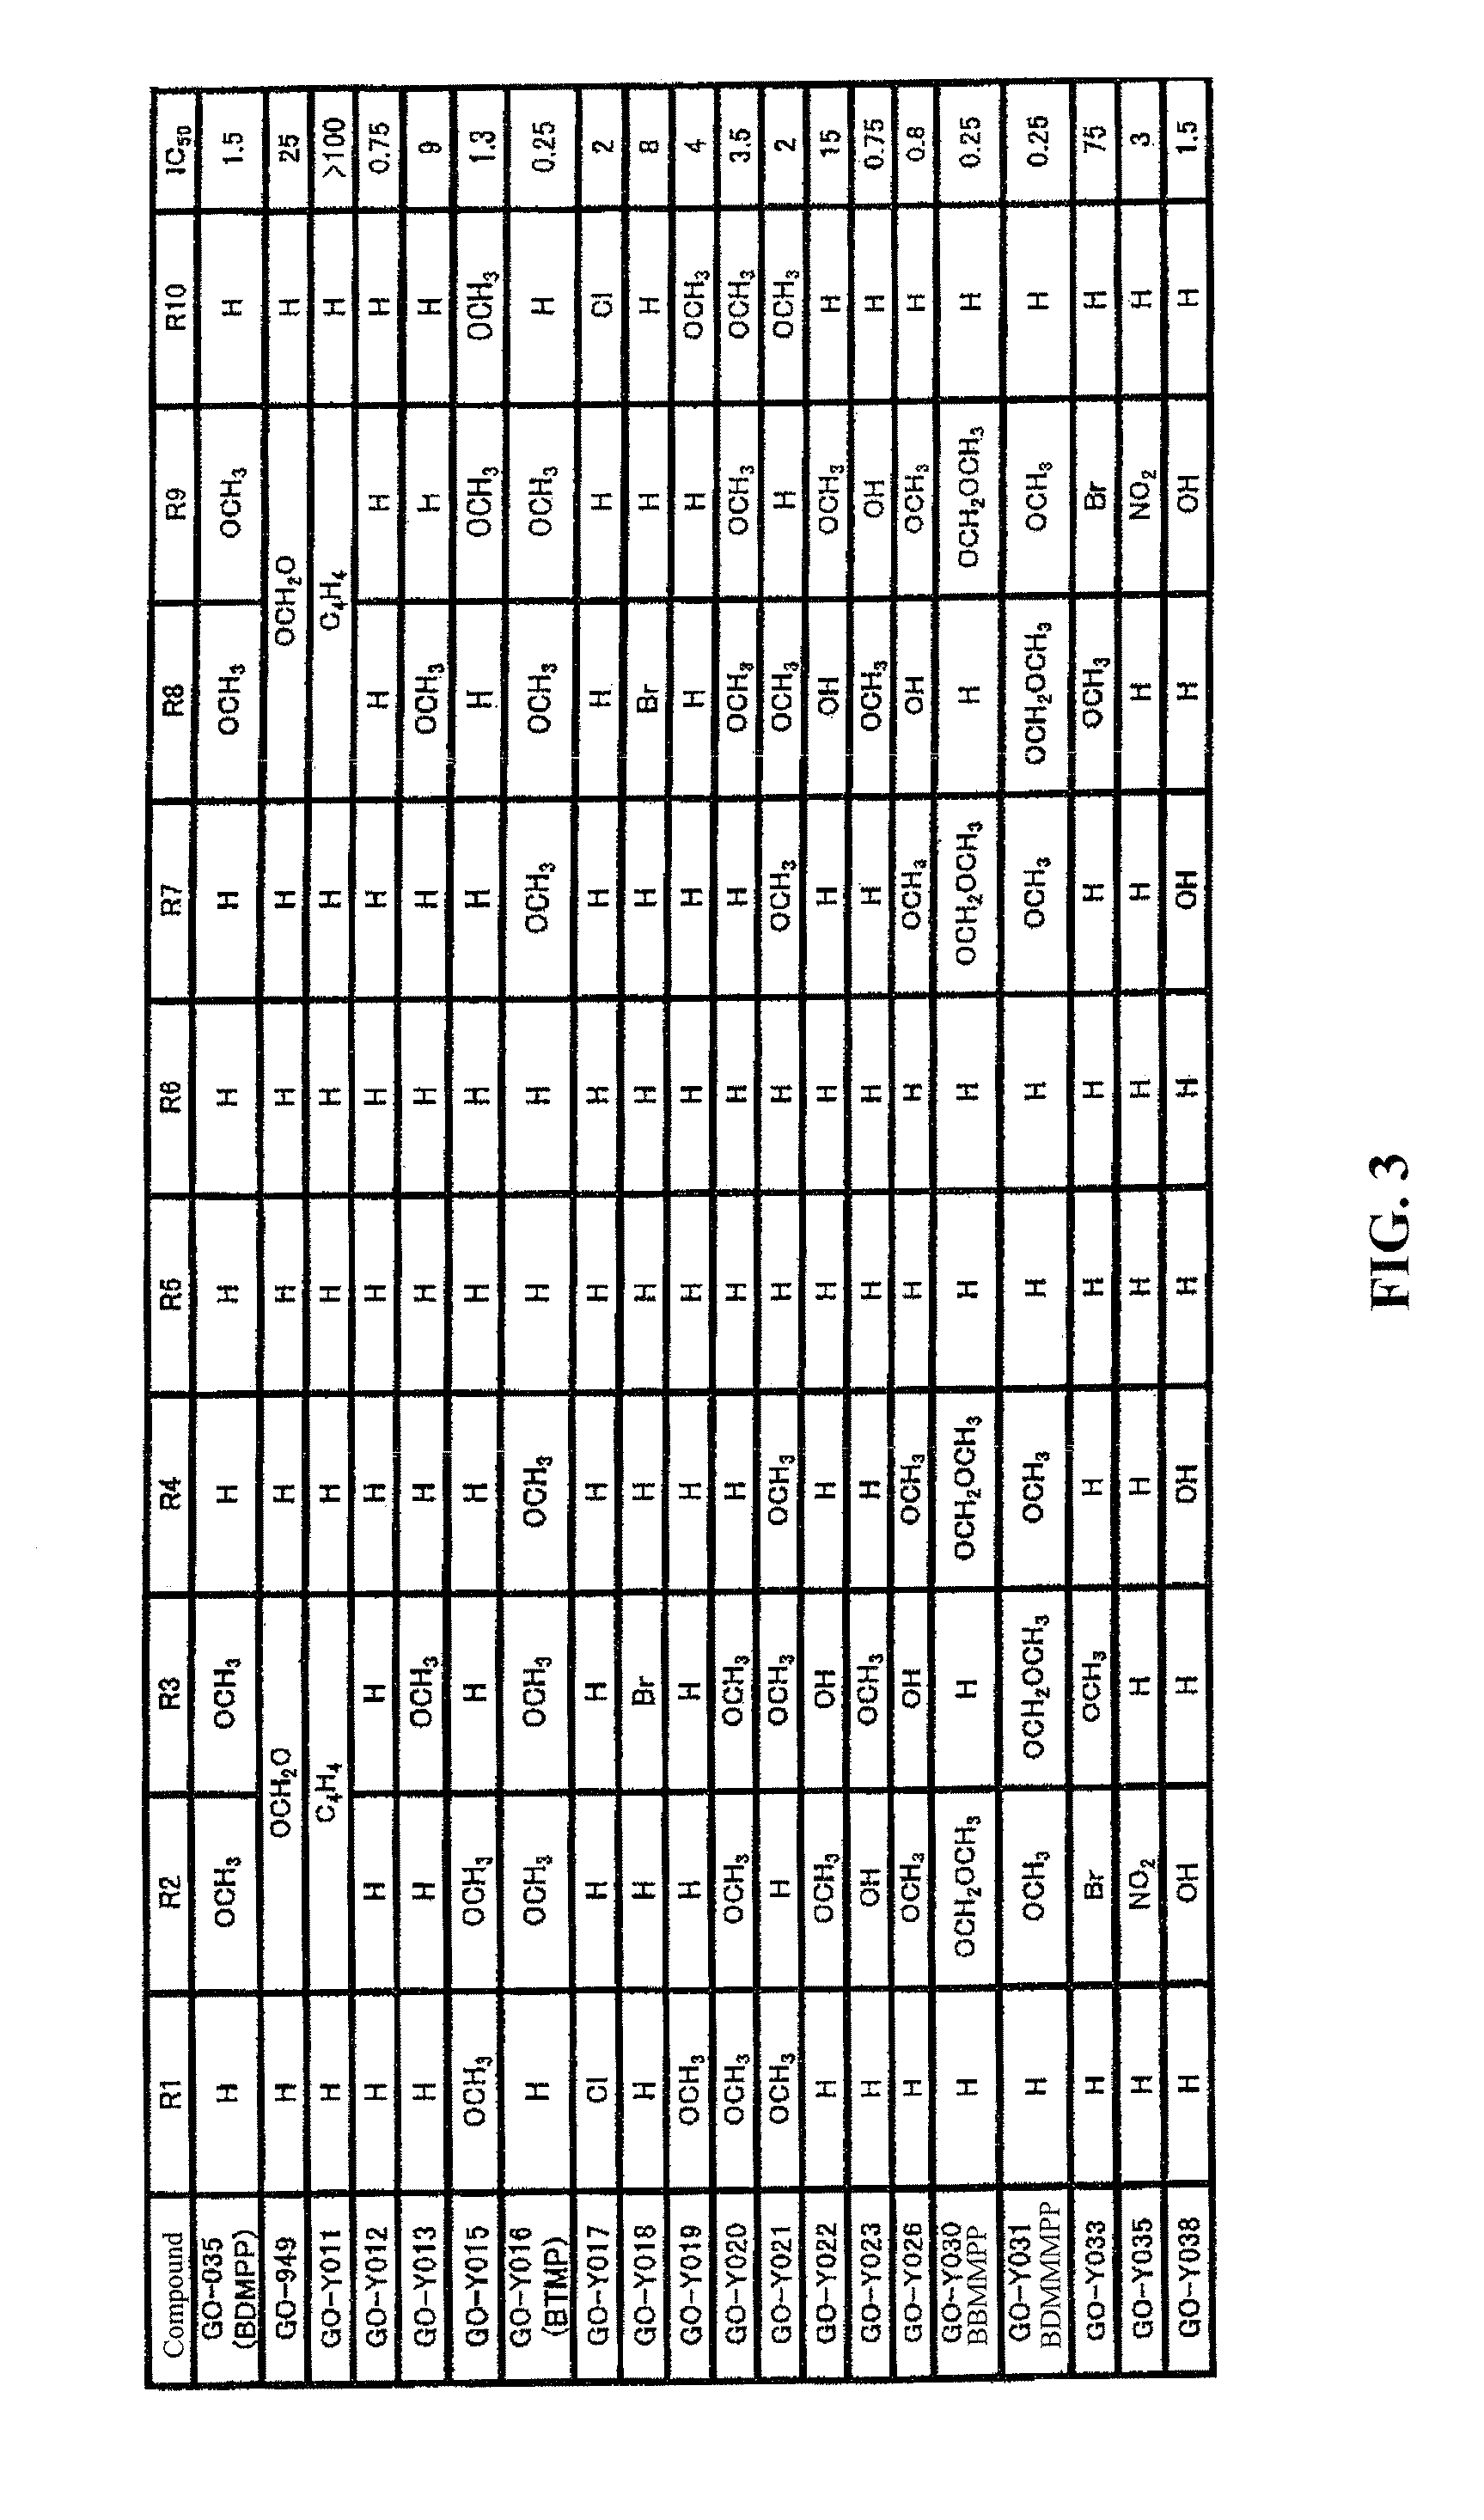 Bis(arylmethylidene)acetone compound, anti-cancer agent, carcinogenesis-preventive agent, inhibitor of expression of Ki-Ras, ErbB2, c-Myc and Cycline D1, β-catenin-degrading agent, and p53 expression enhancer